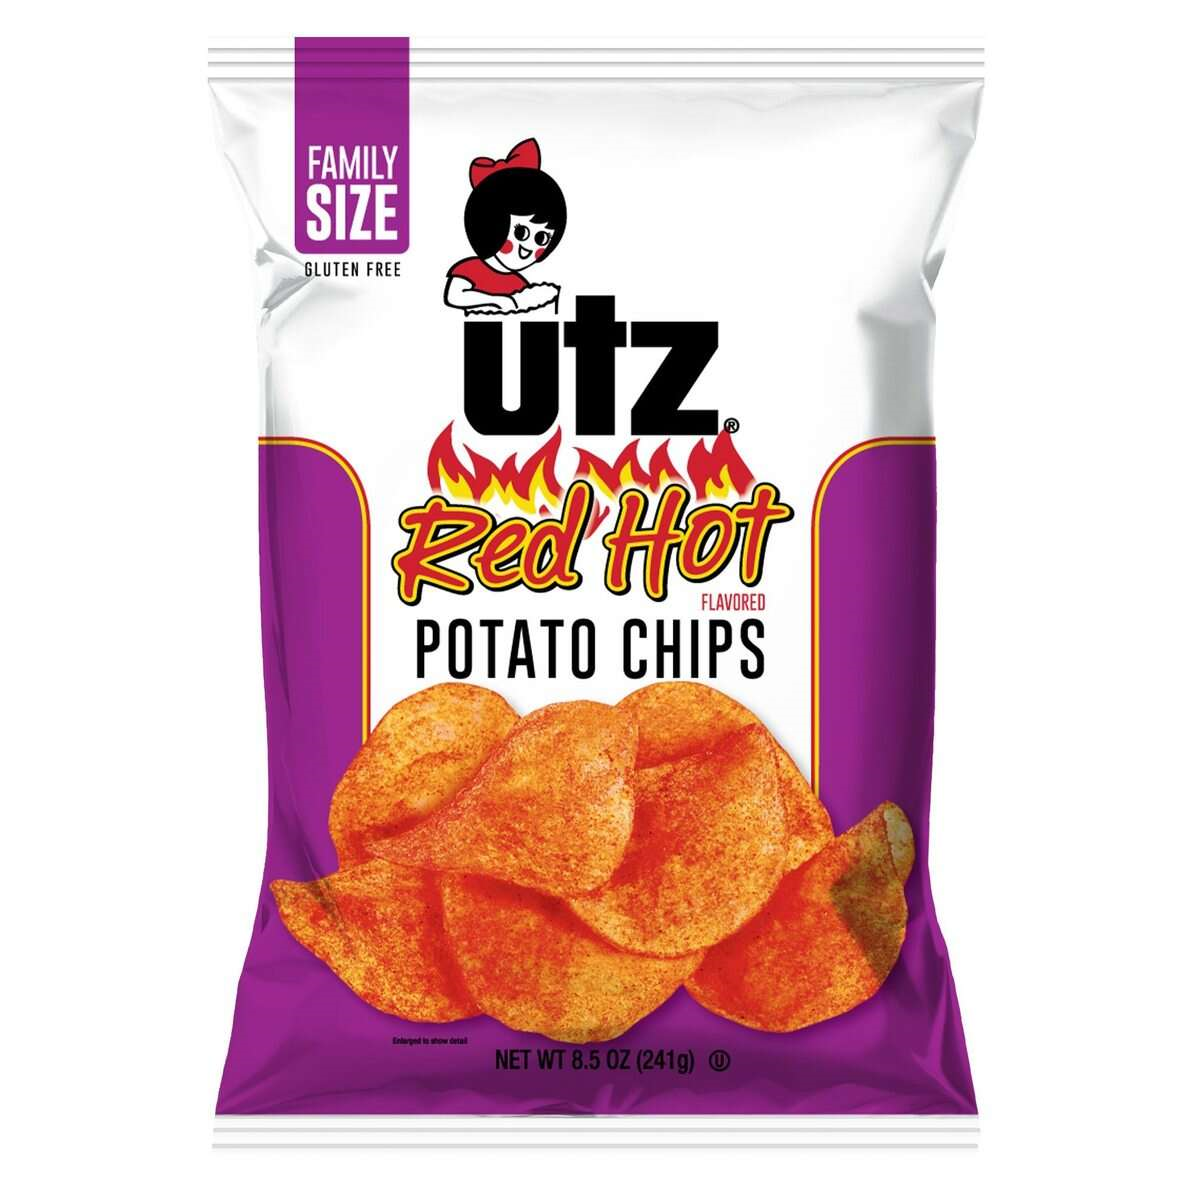 Primary image for Utz Quality Foods Red Hot Flavored Potato Chips, 7.75 oz. Family Size Bags